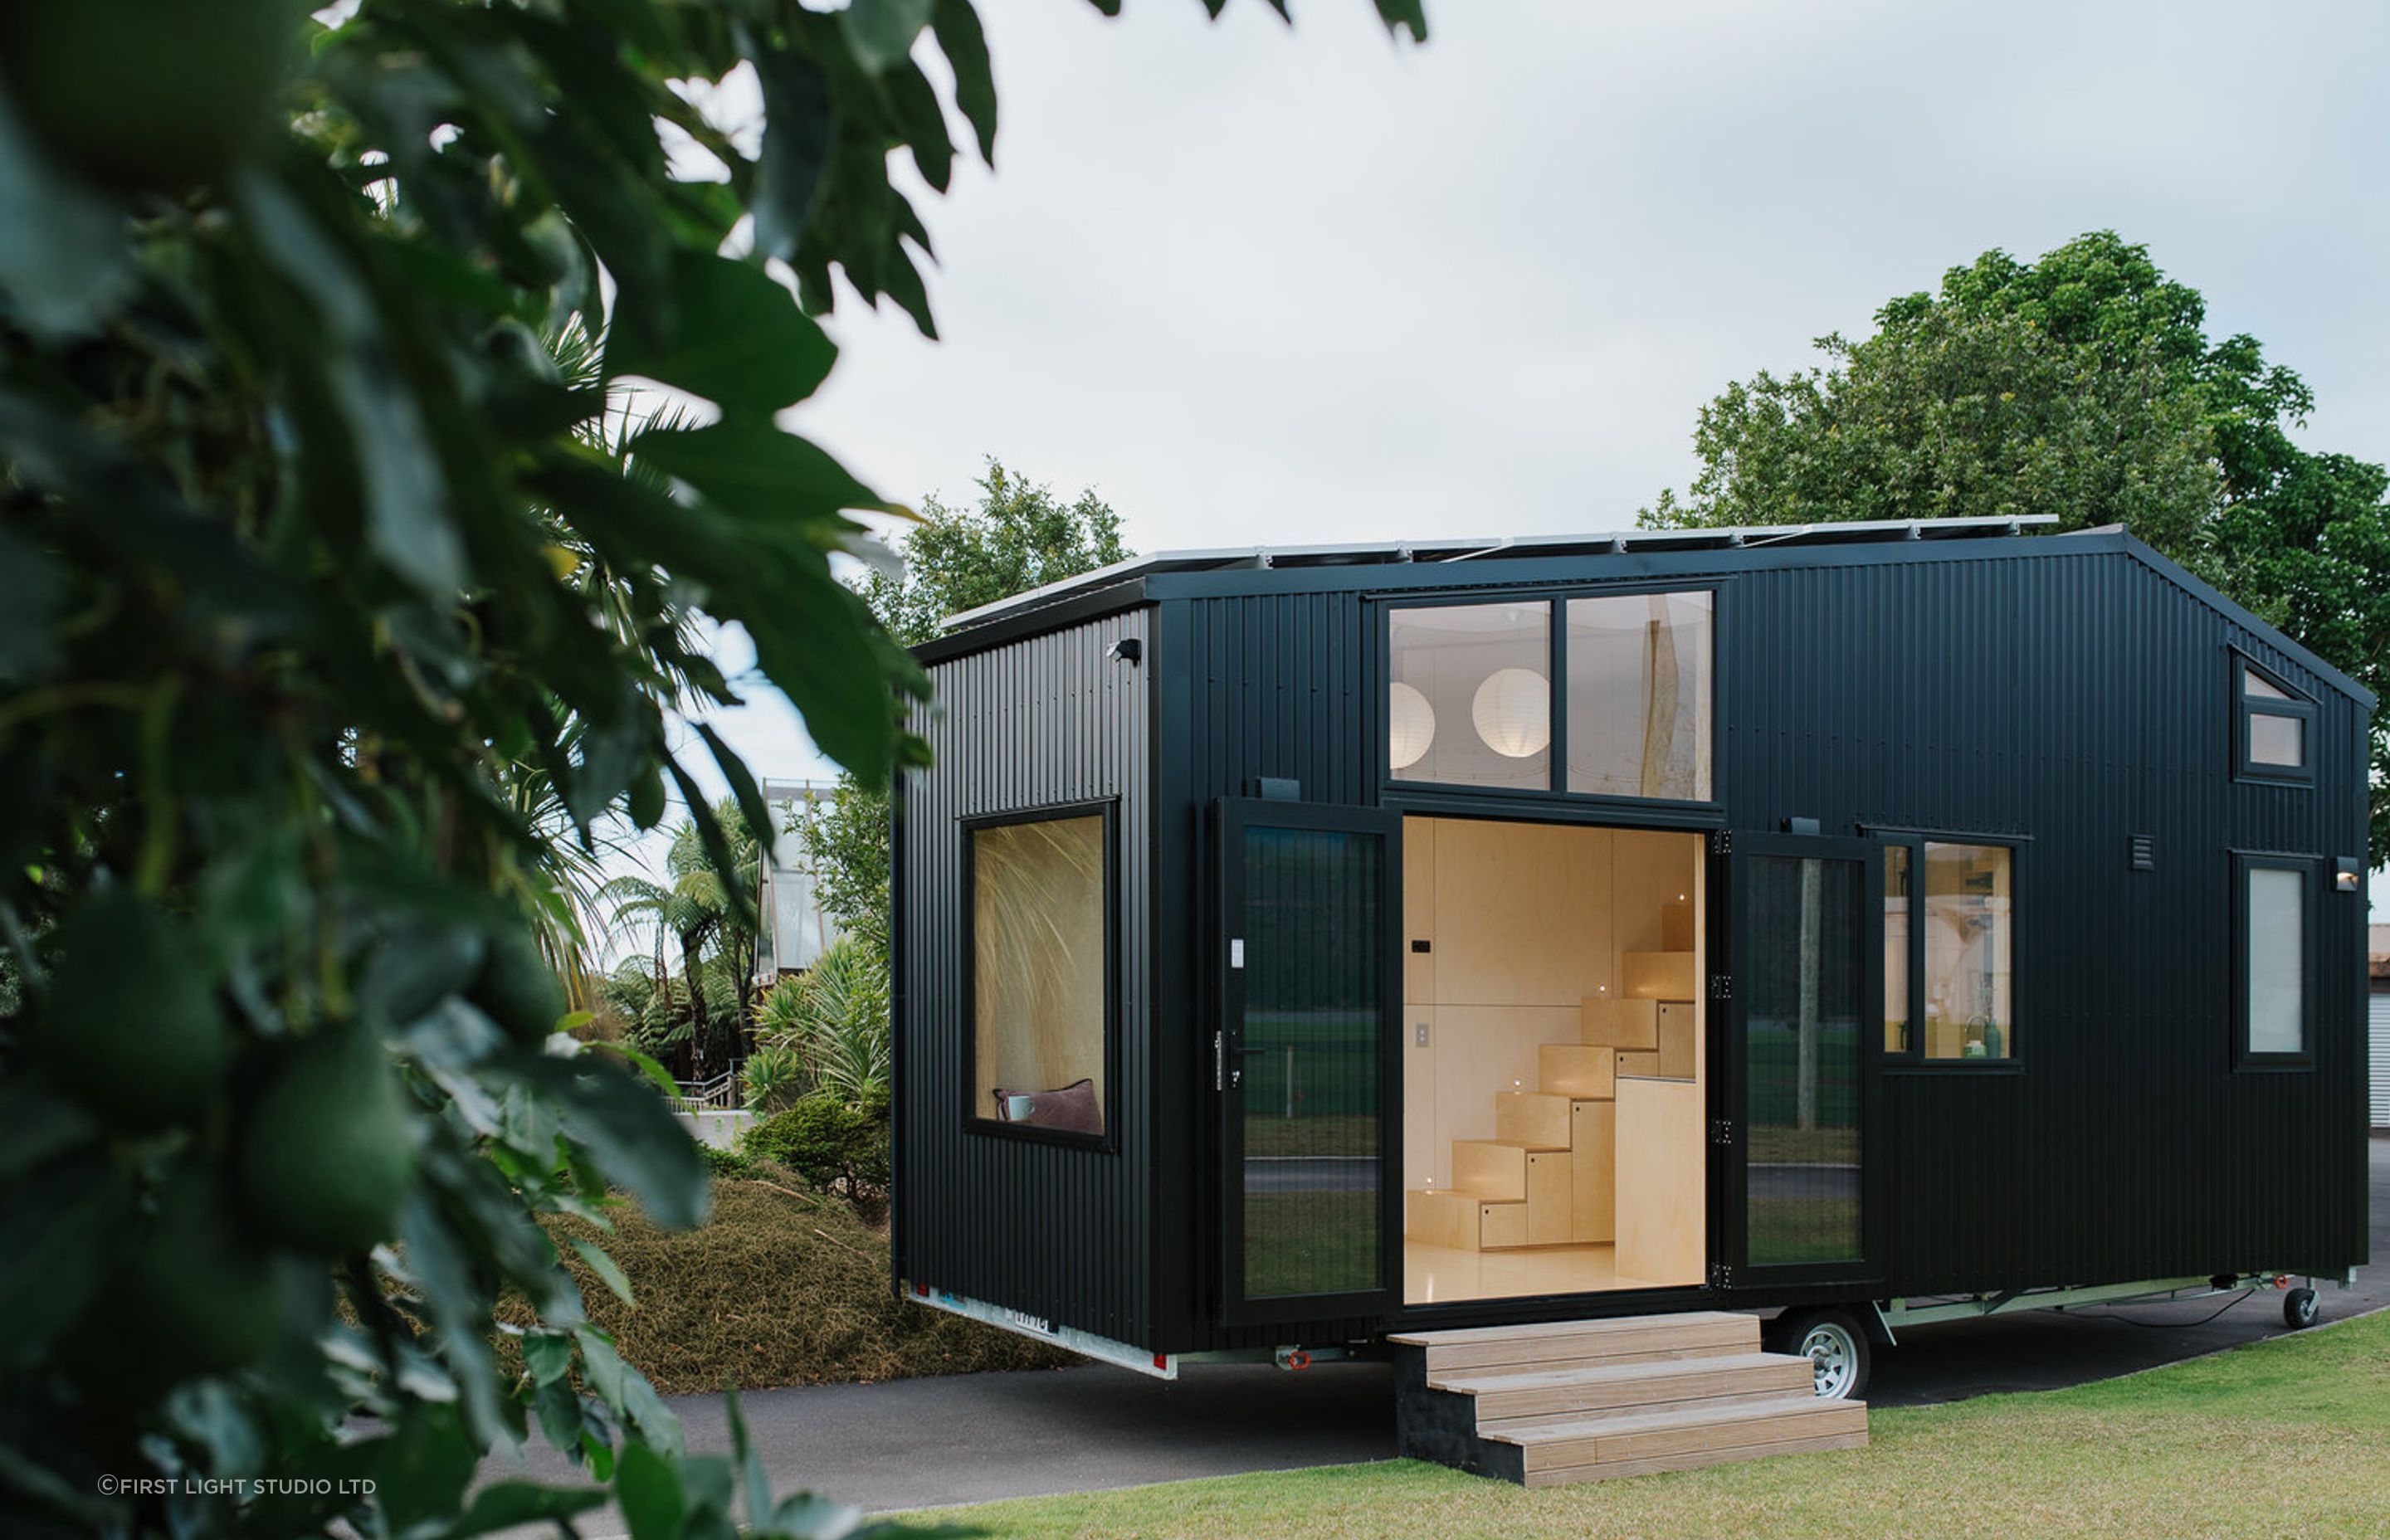 A tiny home with wheels presents both design challenges and opportunities, wonderfully demonstrated in this solar-powered tiny house in Ohariu by First Light Studio - Photography: Build Tiny